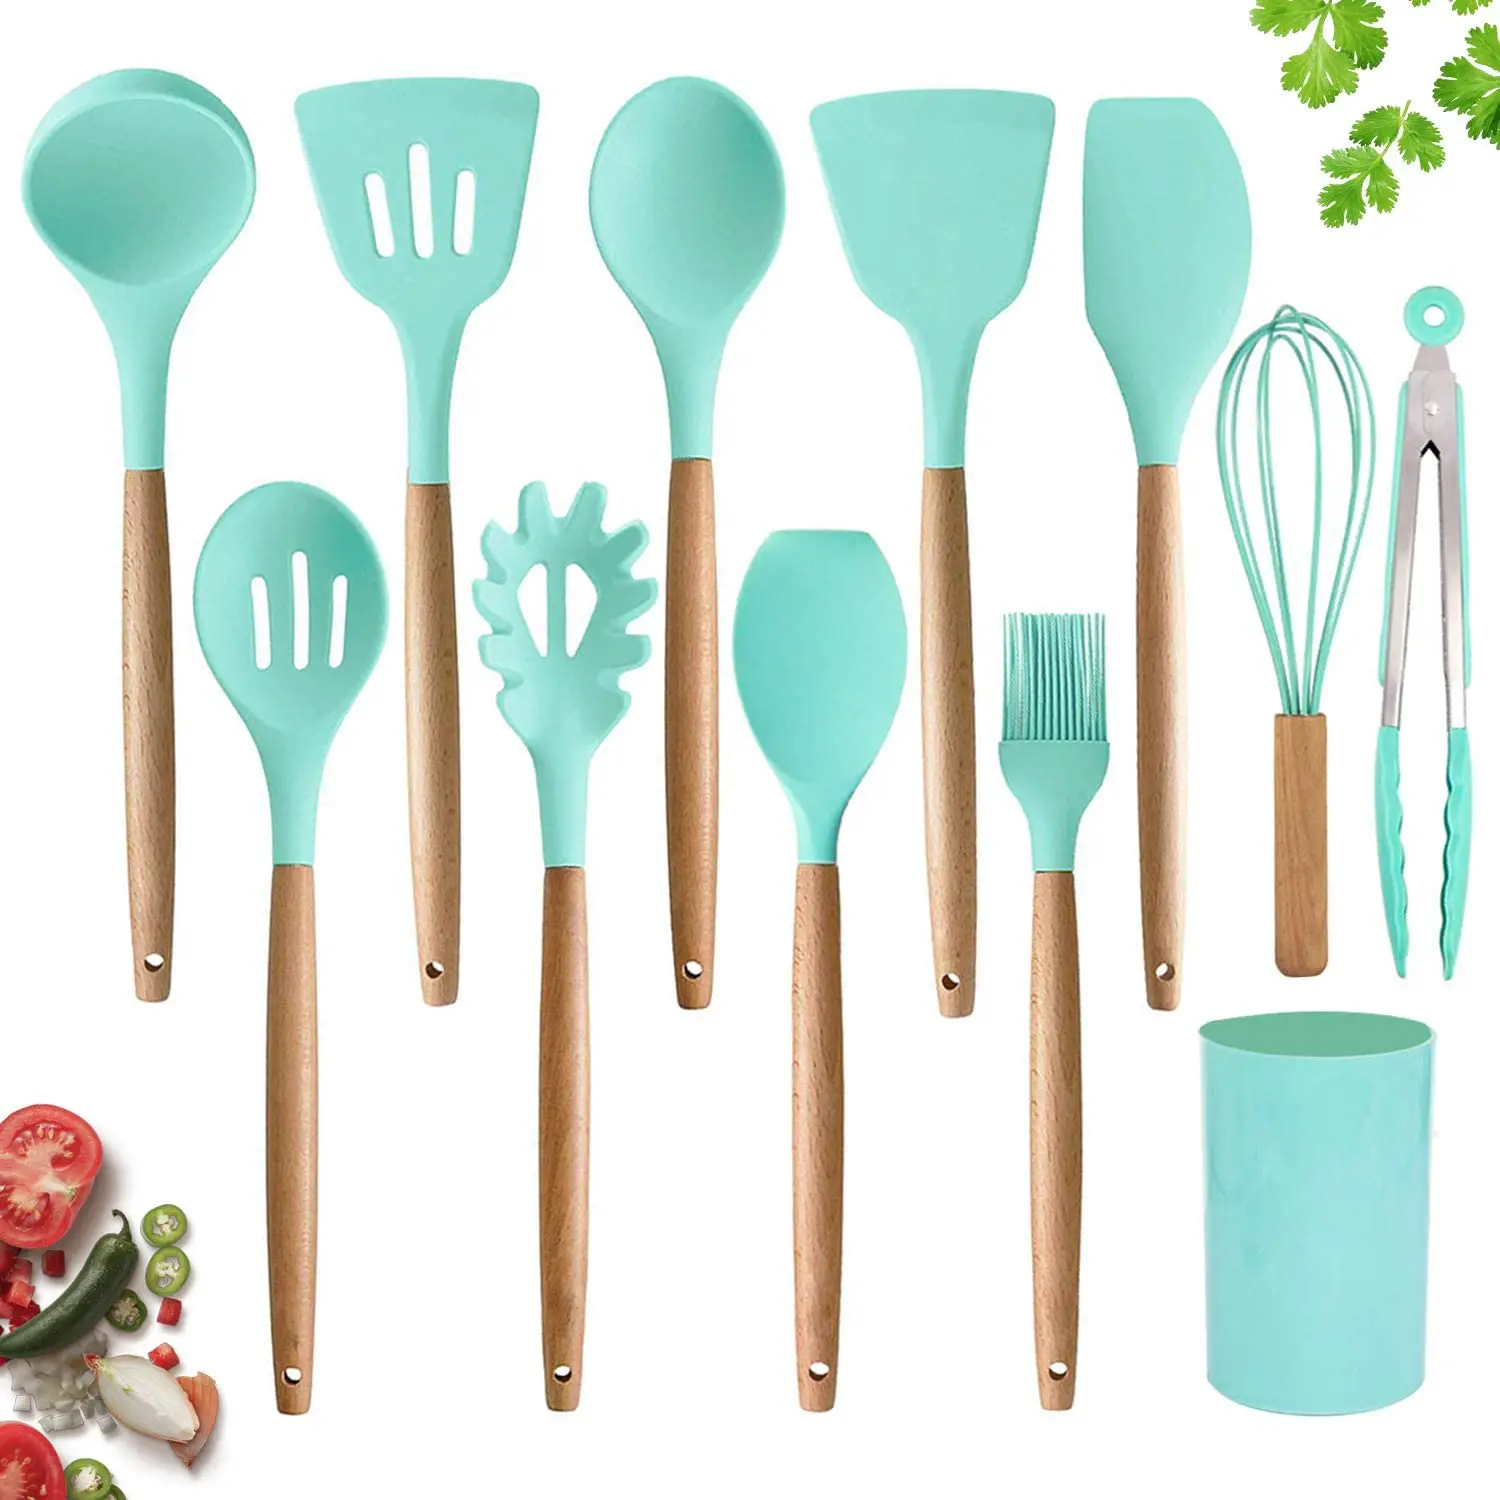 

13 Pcs Silicone Cooking Utensils Set with Bamboo Wood Handles for Nonstick Cookware,Non Toxic Turner Tongs Spatula Spoon Set, Purple/red/black/light green/dark green/pink/gray or customized